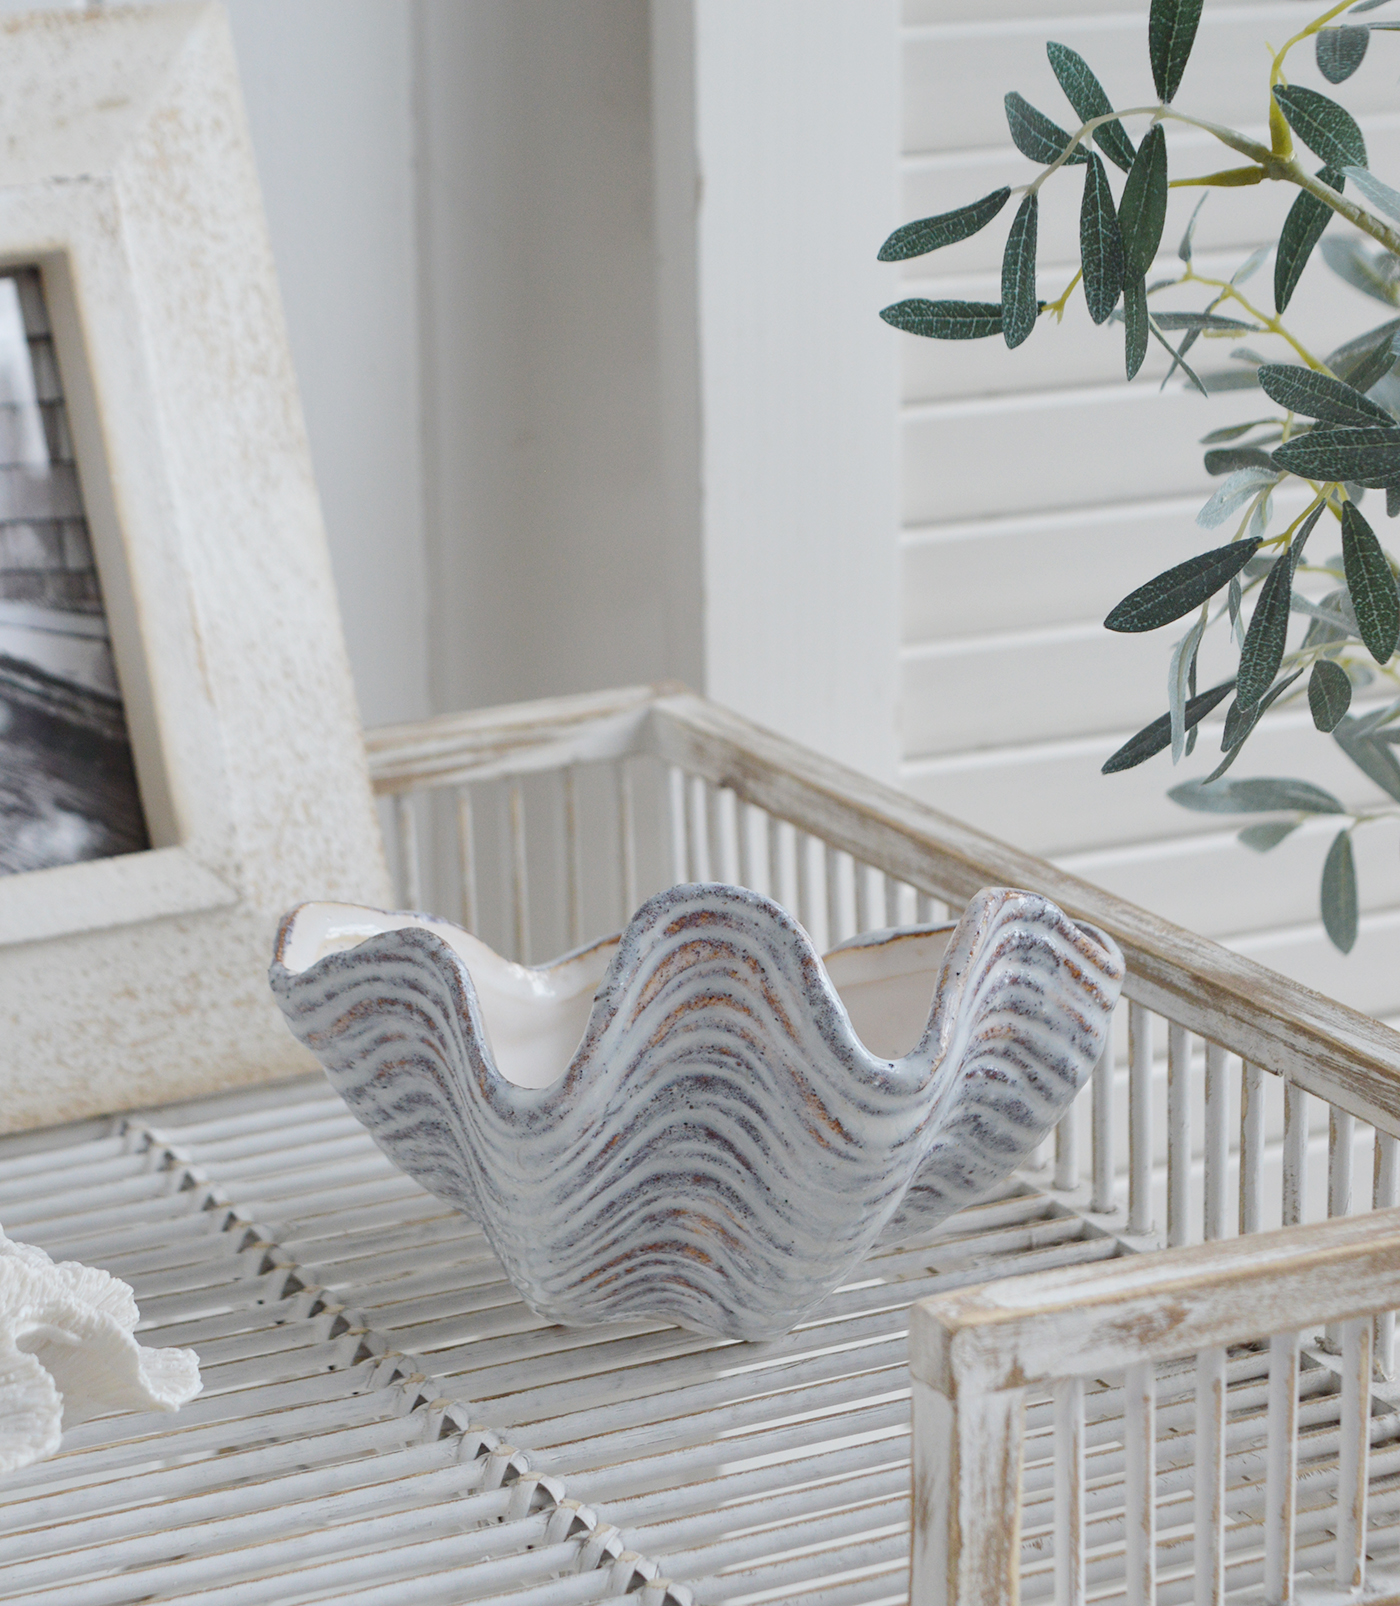 Ceramic clam for elegant Hamptons styling of a console in a Beach House Coastal home